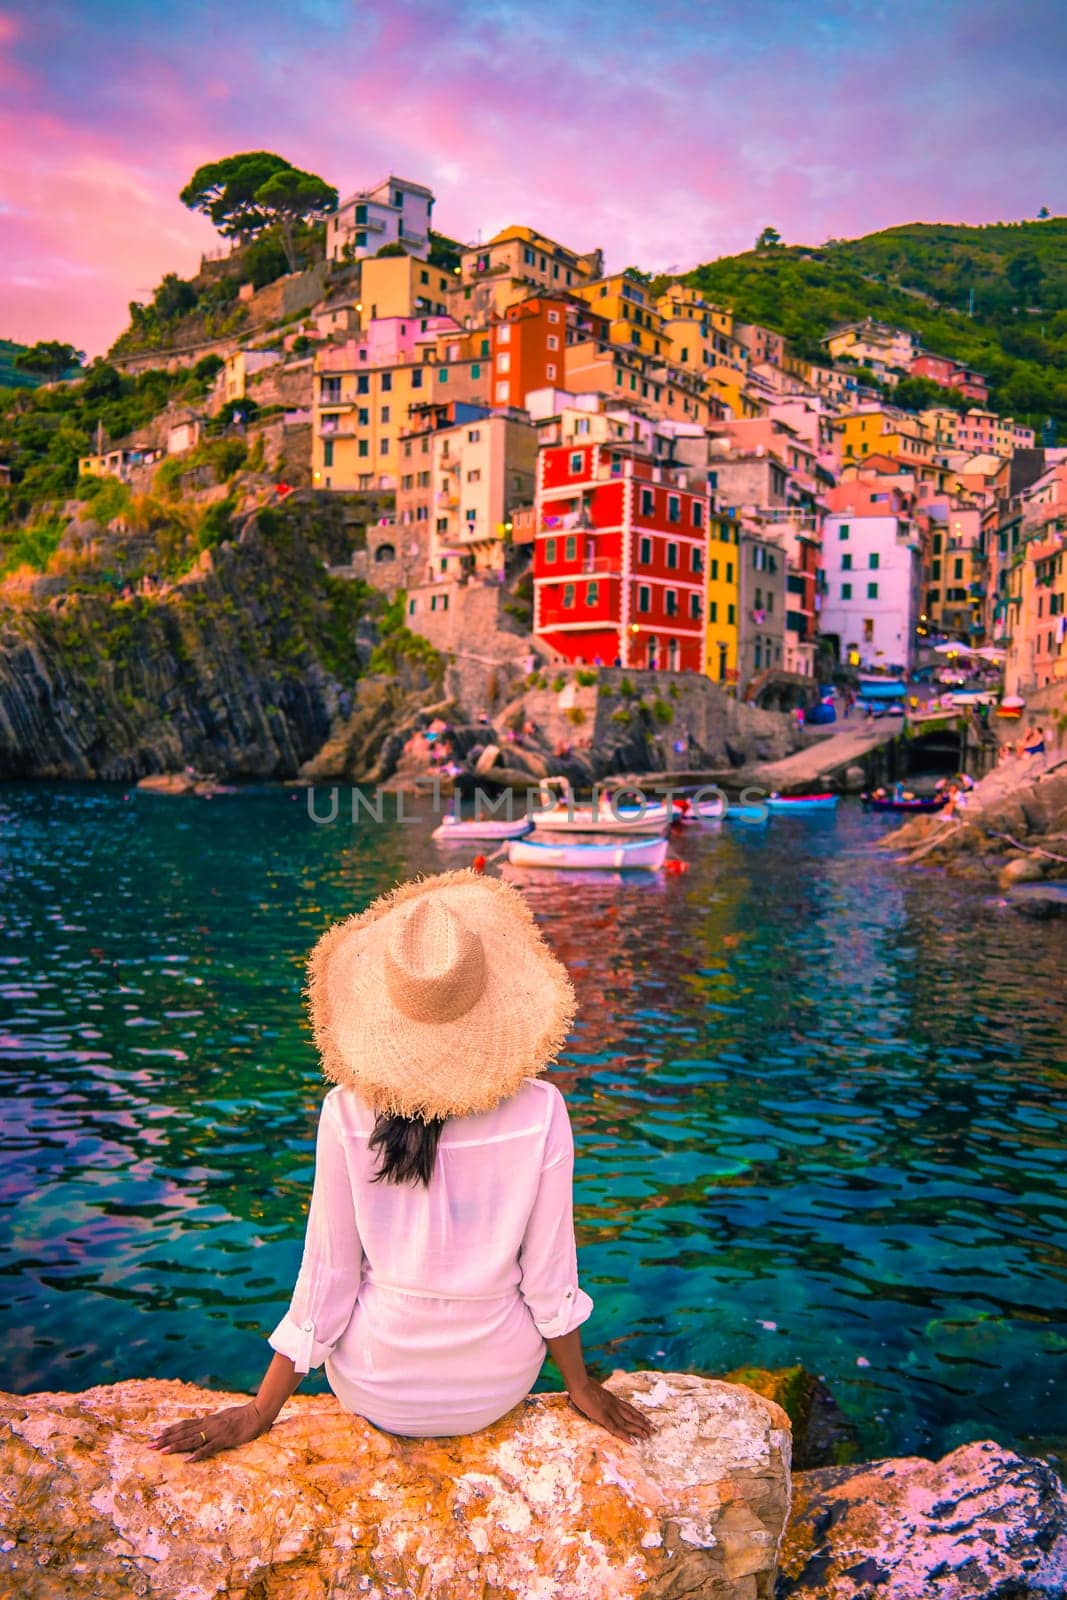 Riomaggiore Cinque Terre Italy, colorful village harbor front by the ocean, young Asian woman watching the sunset at waterfront looking out over Riomaggiore village Cinque Terre Italy